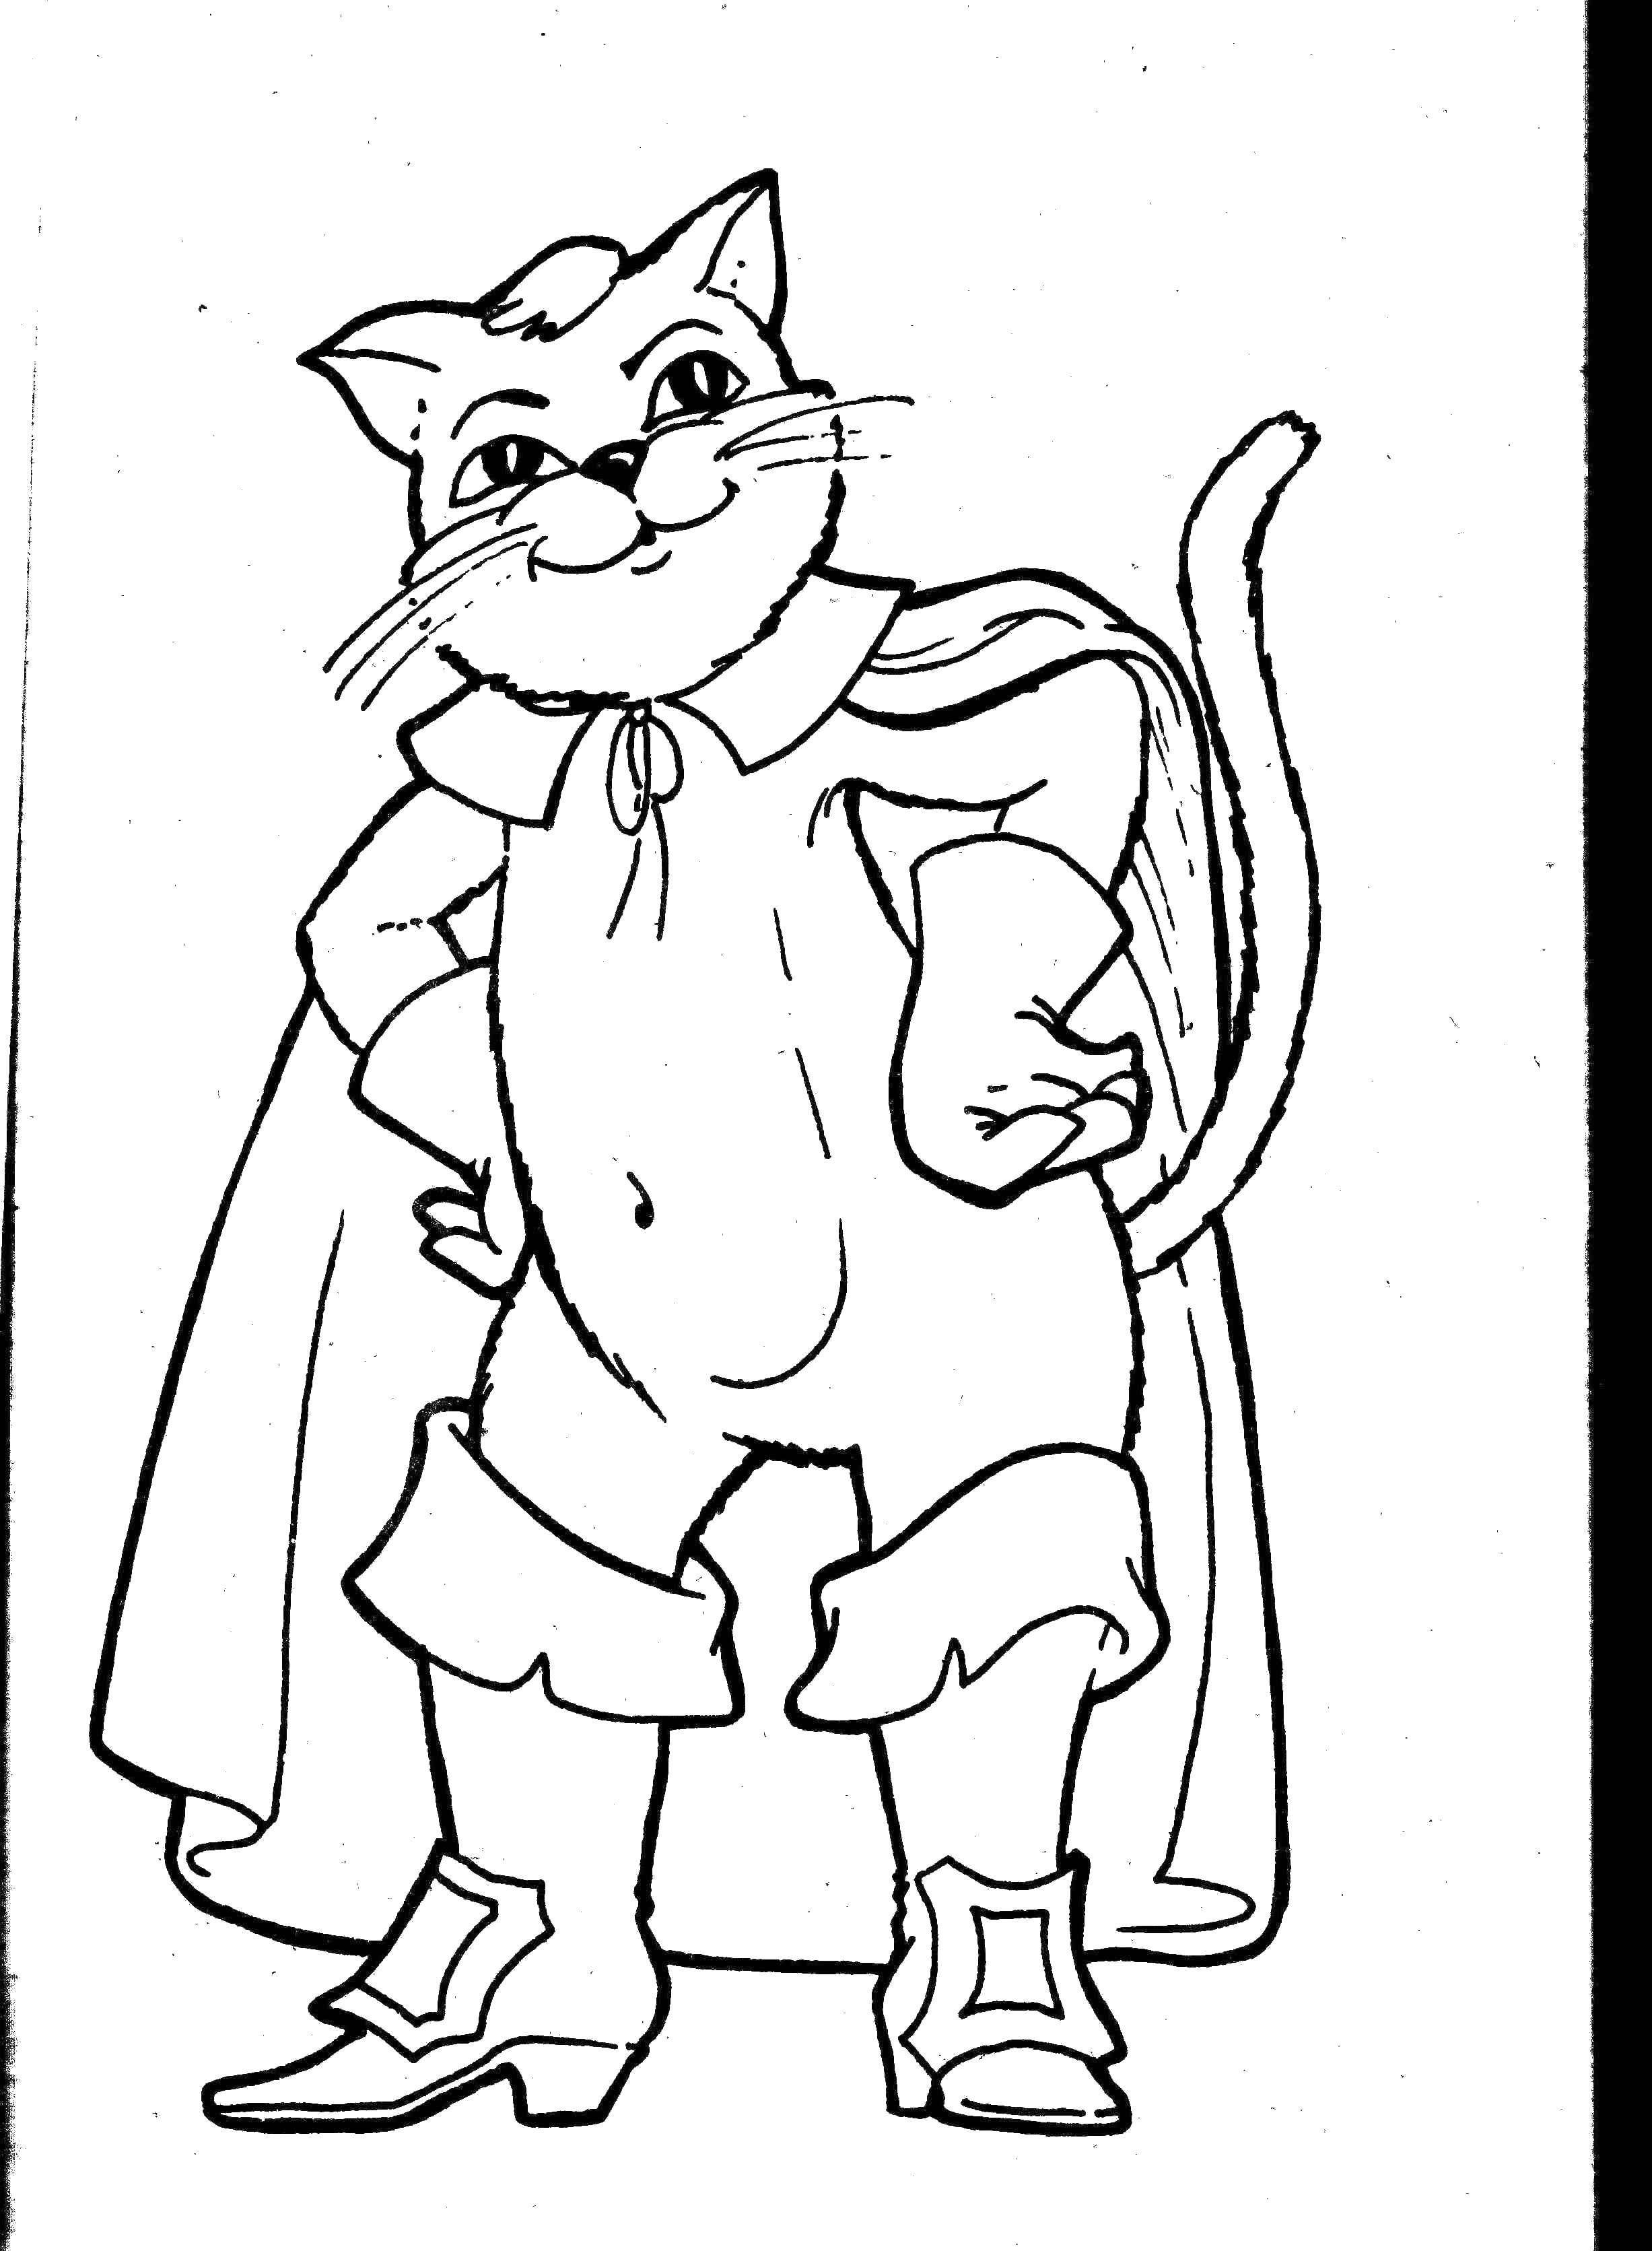 Coloring Puss in boots. Category cartoons. Tags:  cat, cloak, boots.